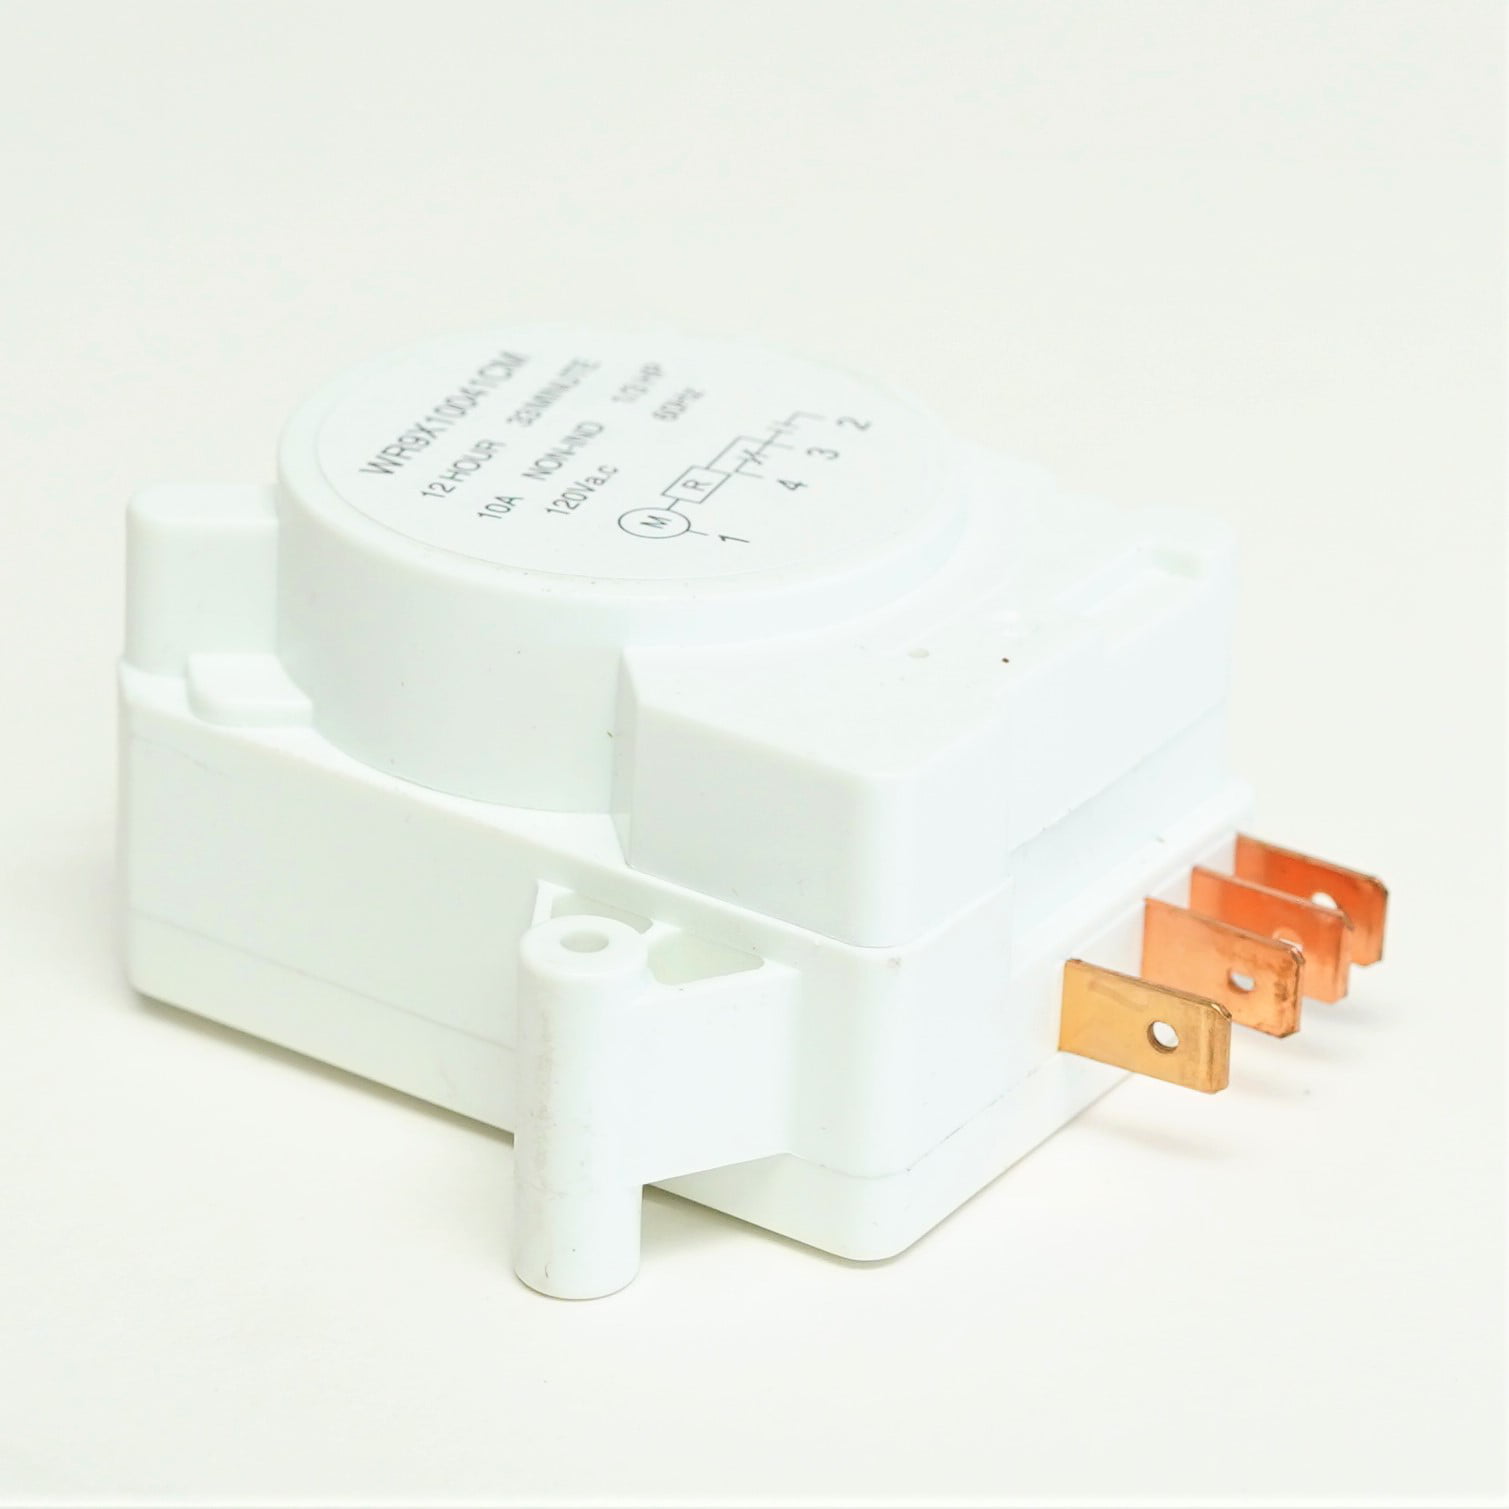 Details about   Refrigerator Defrost Thermostat Limit L58-30 For GE WR50X10070 Tube Mount 